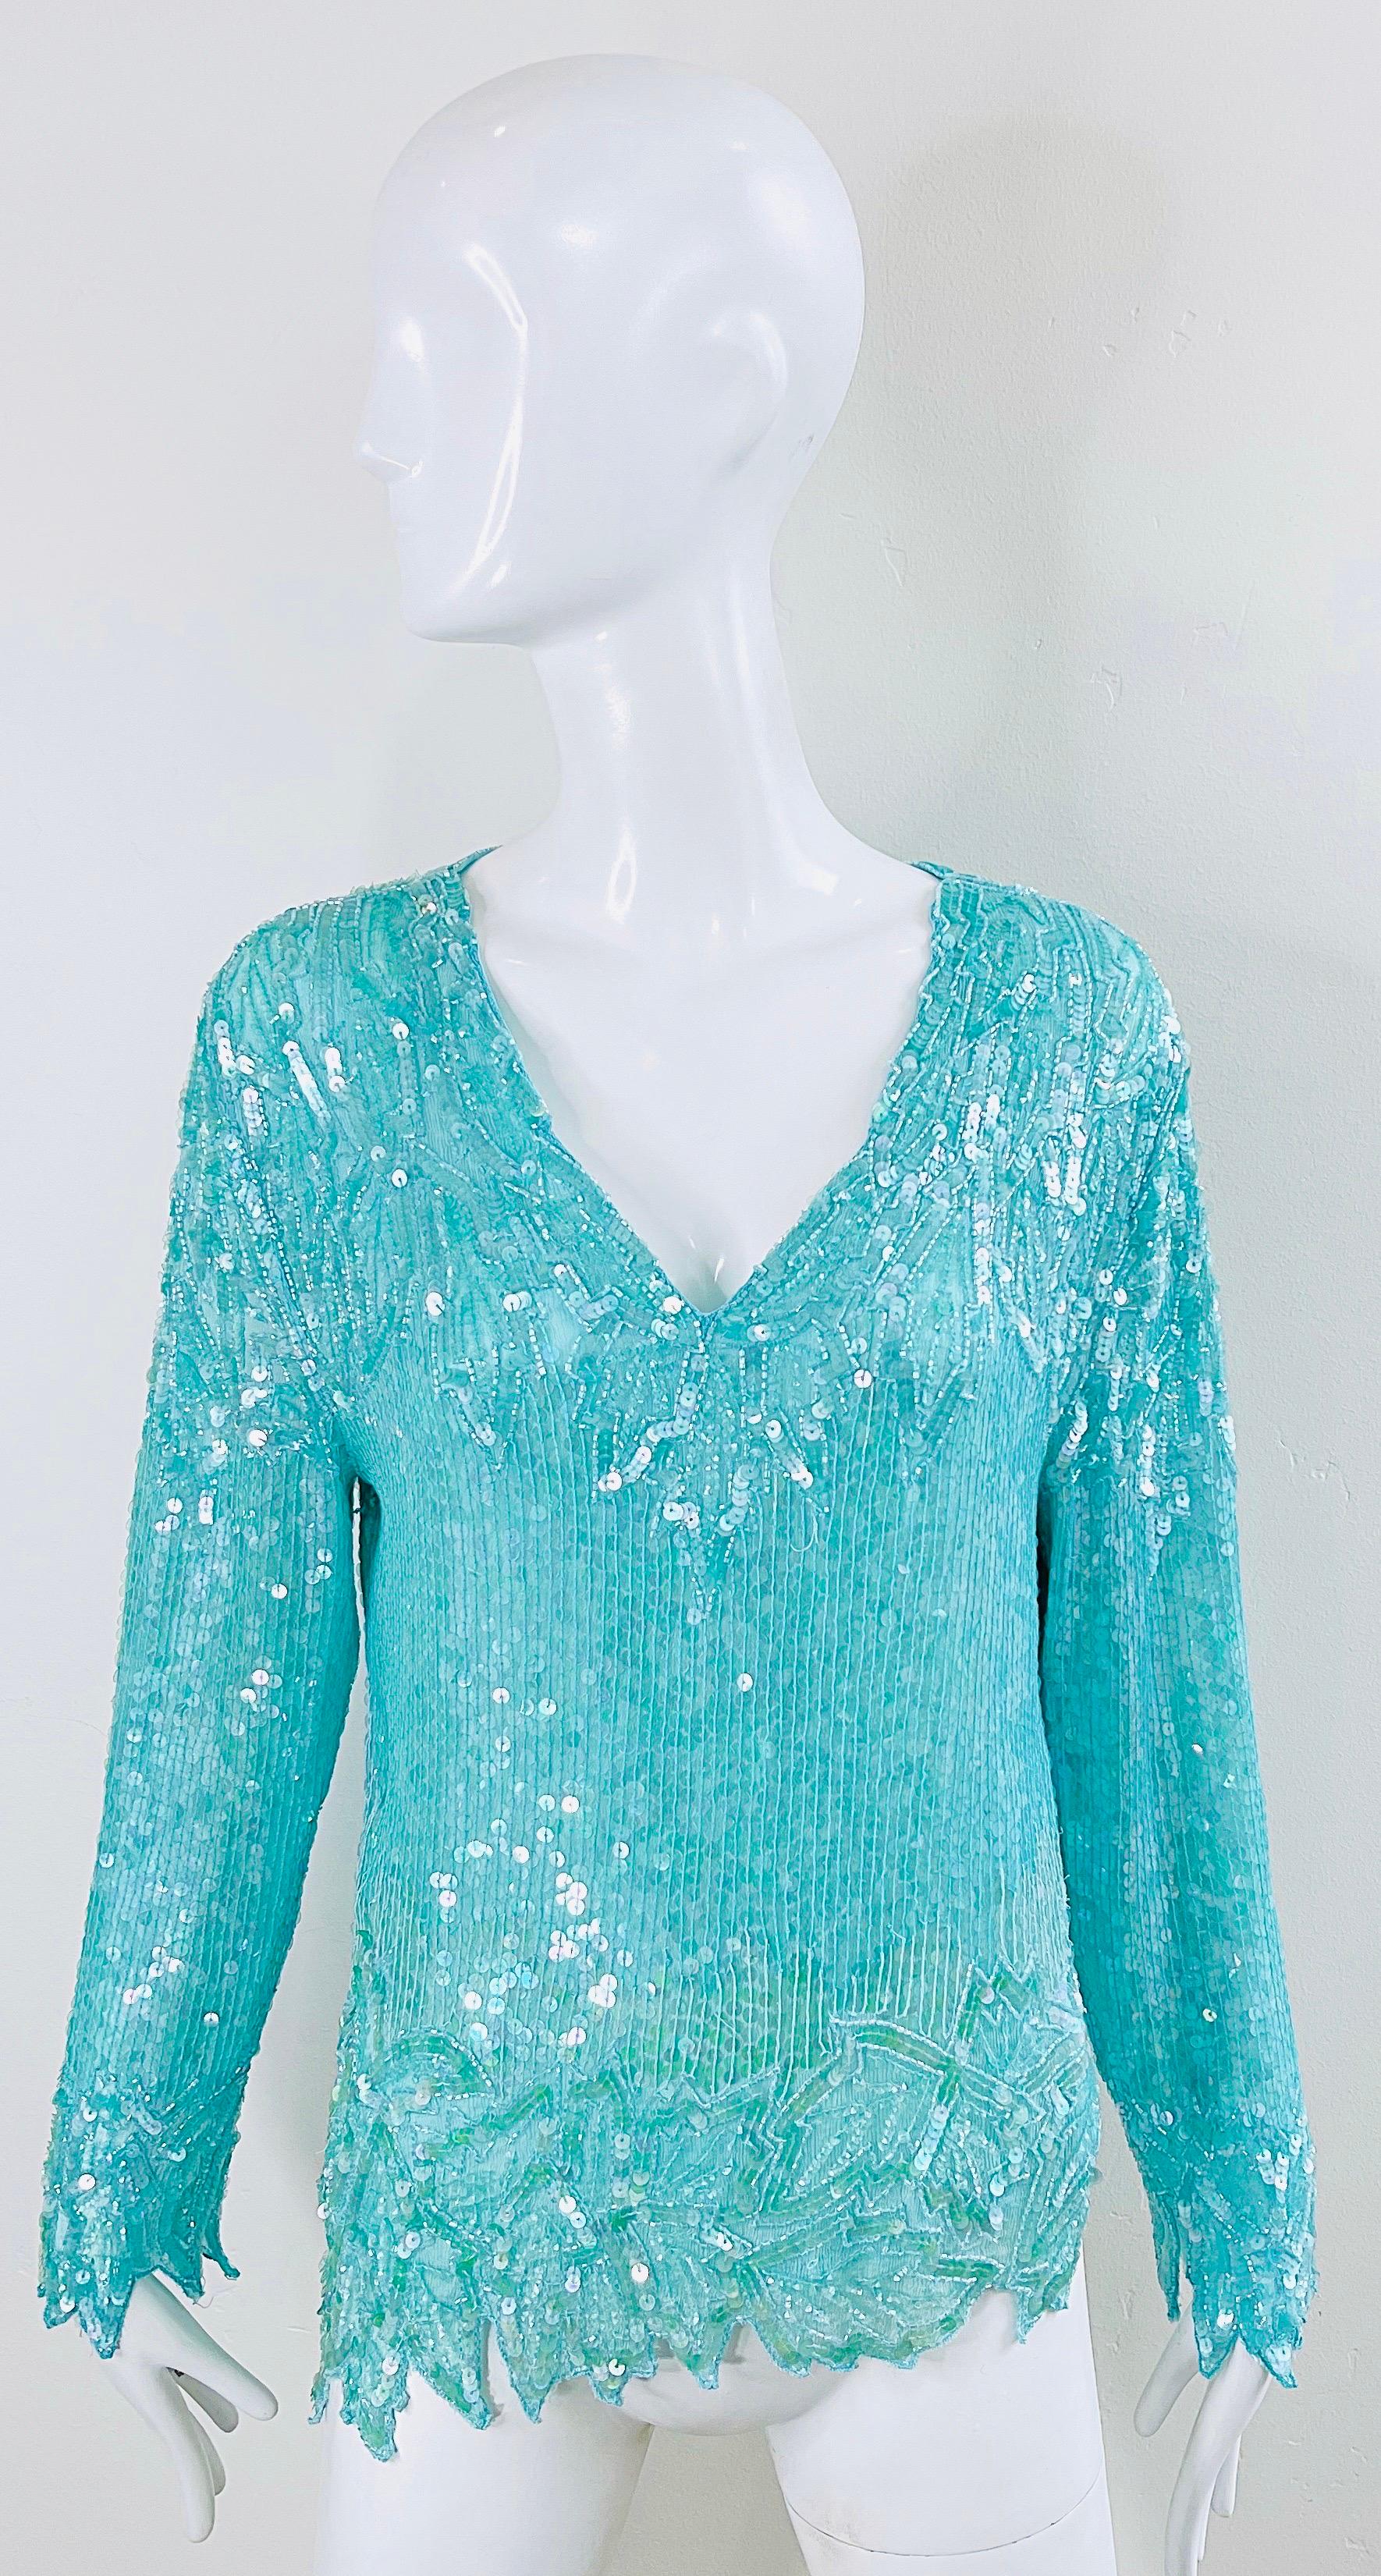 1980s Swee Lo Turquoise Blue Sequin Beaded Silk Chiffon Vintage 80s Blouse For Sale 11